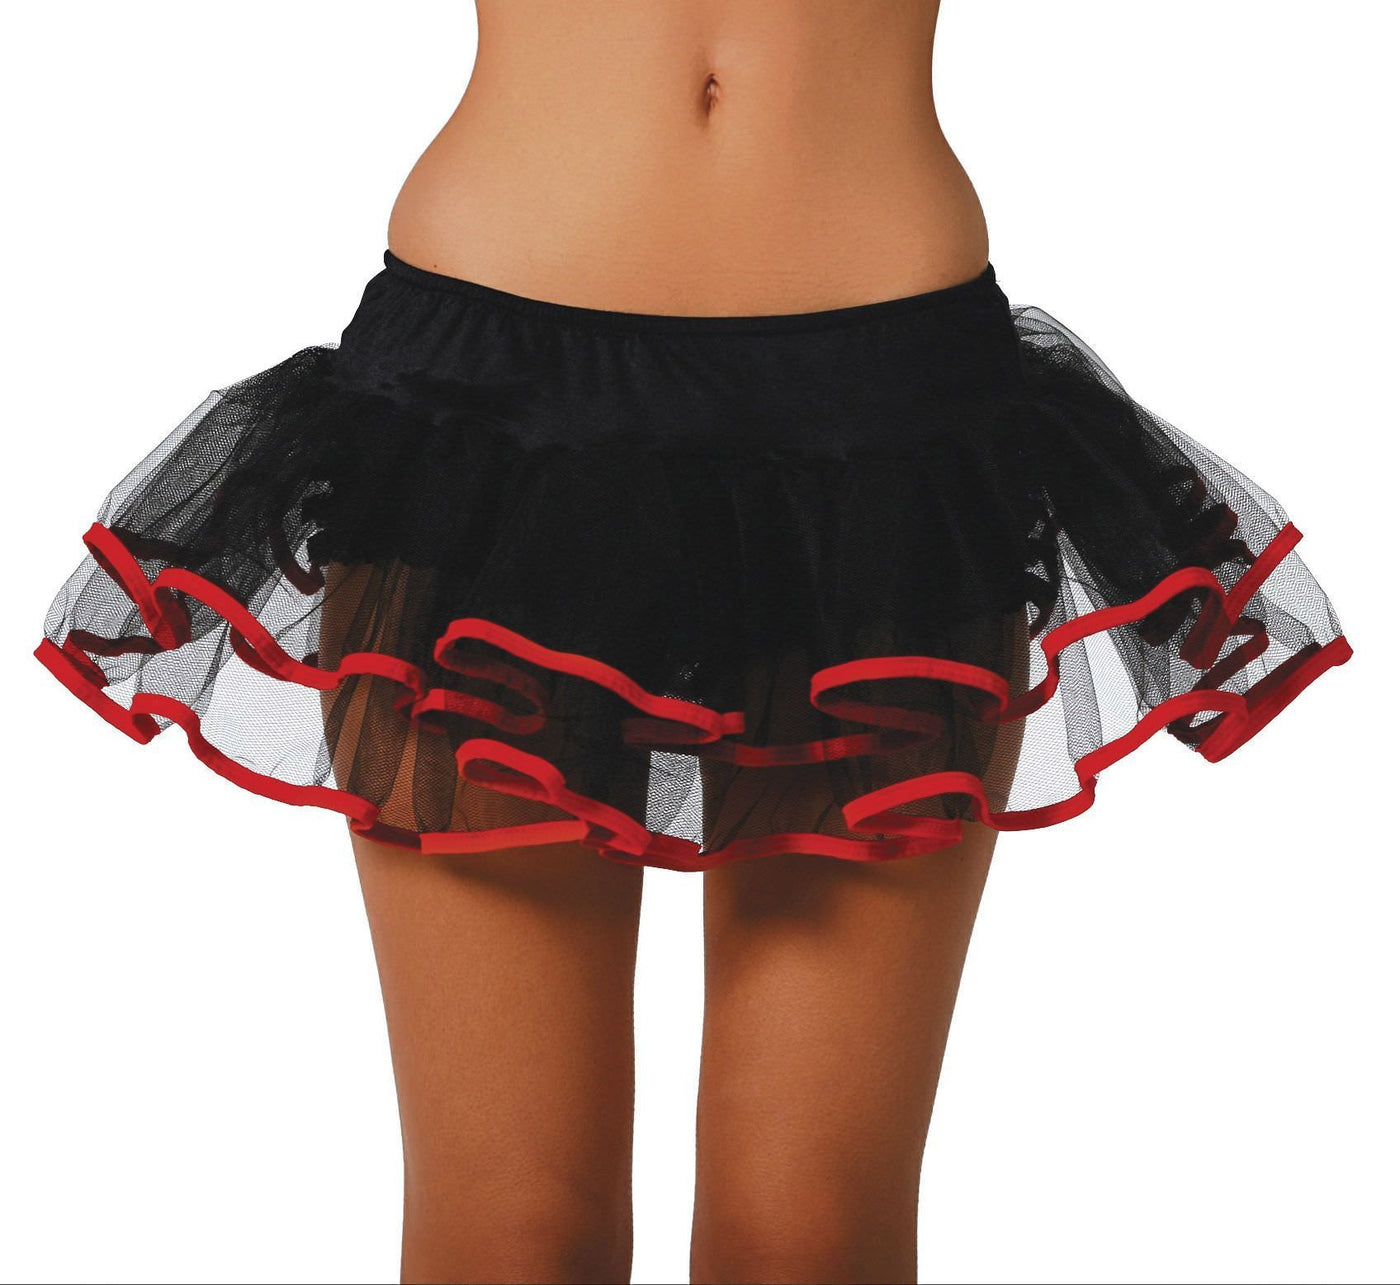 Buy Double Layered Petticoat from RomaRetailShop for 14.99 with Same Day Shipping Designed by Roma Costume 1600-Blk/RD-O/S